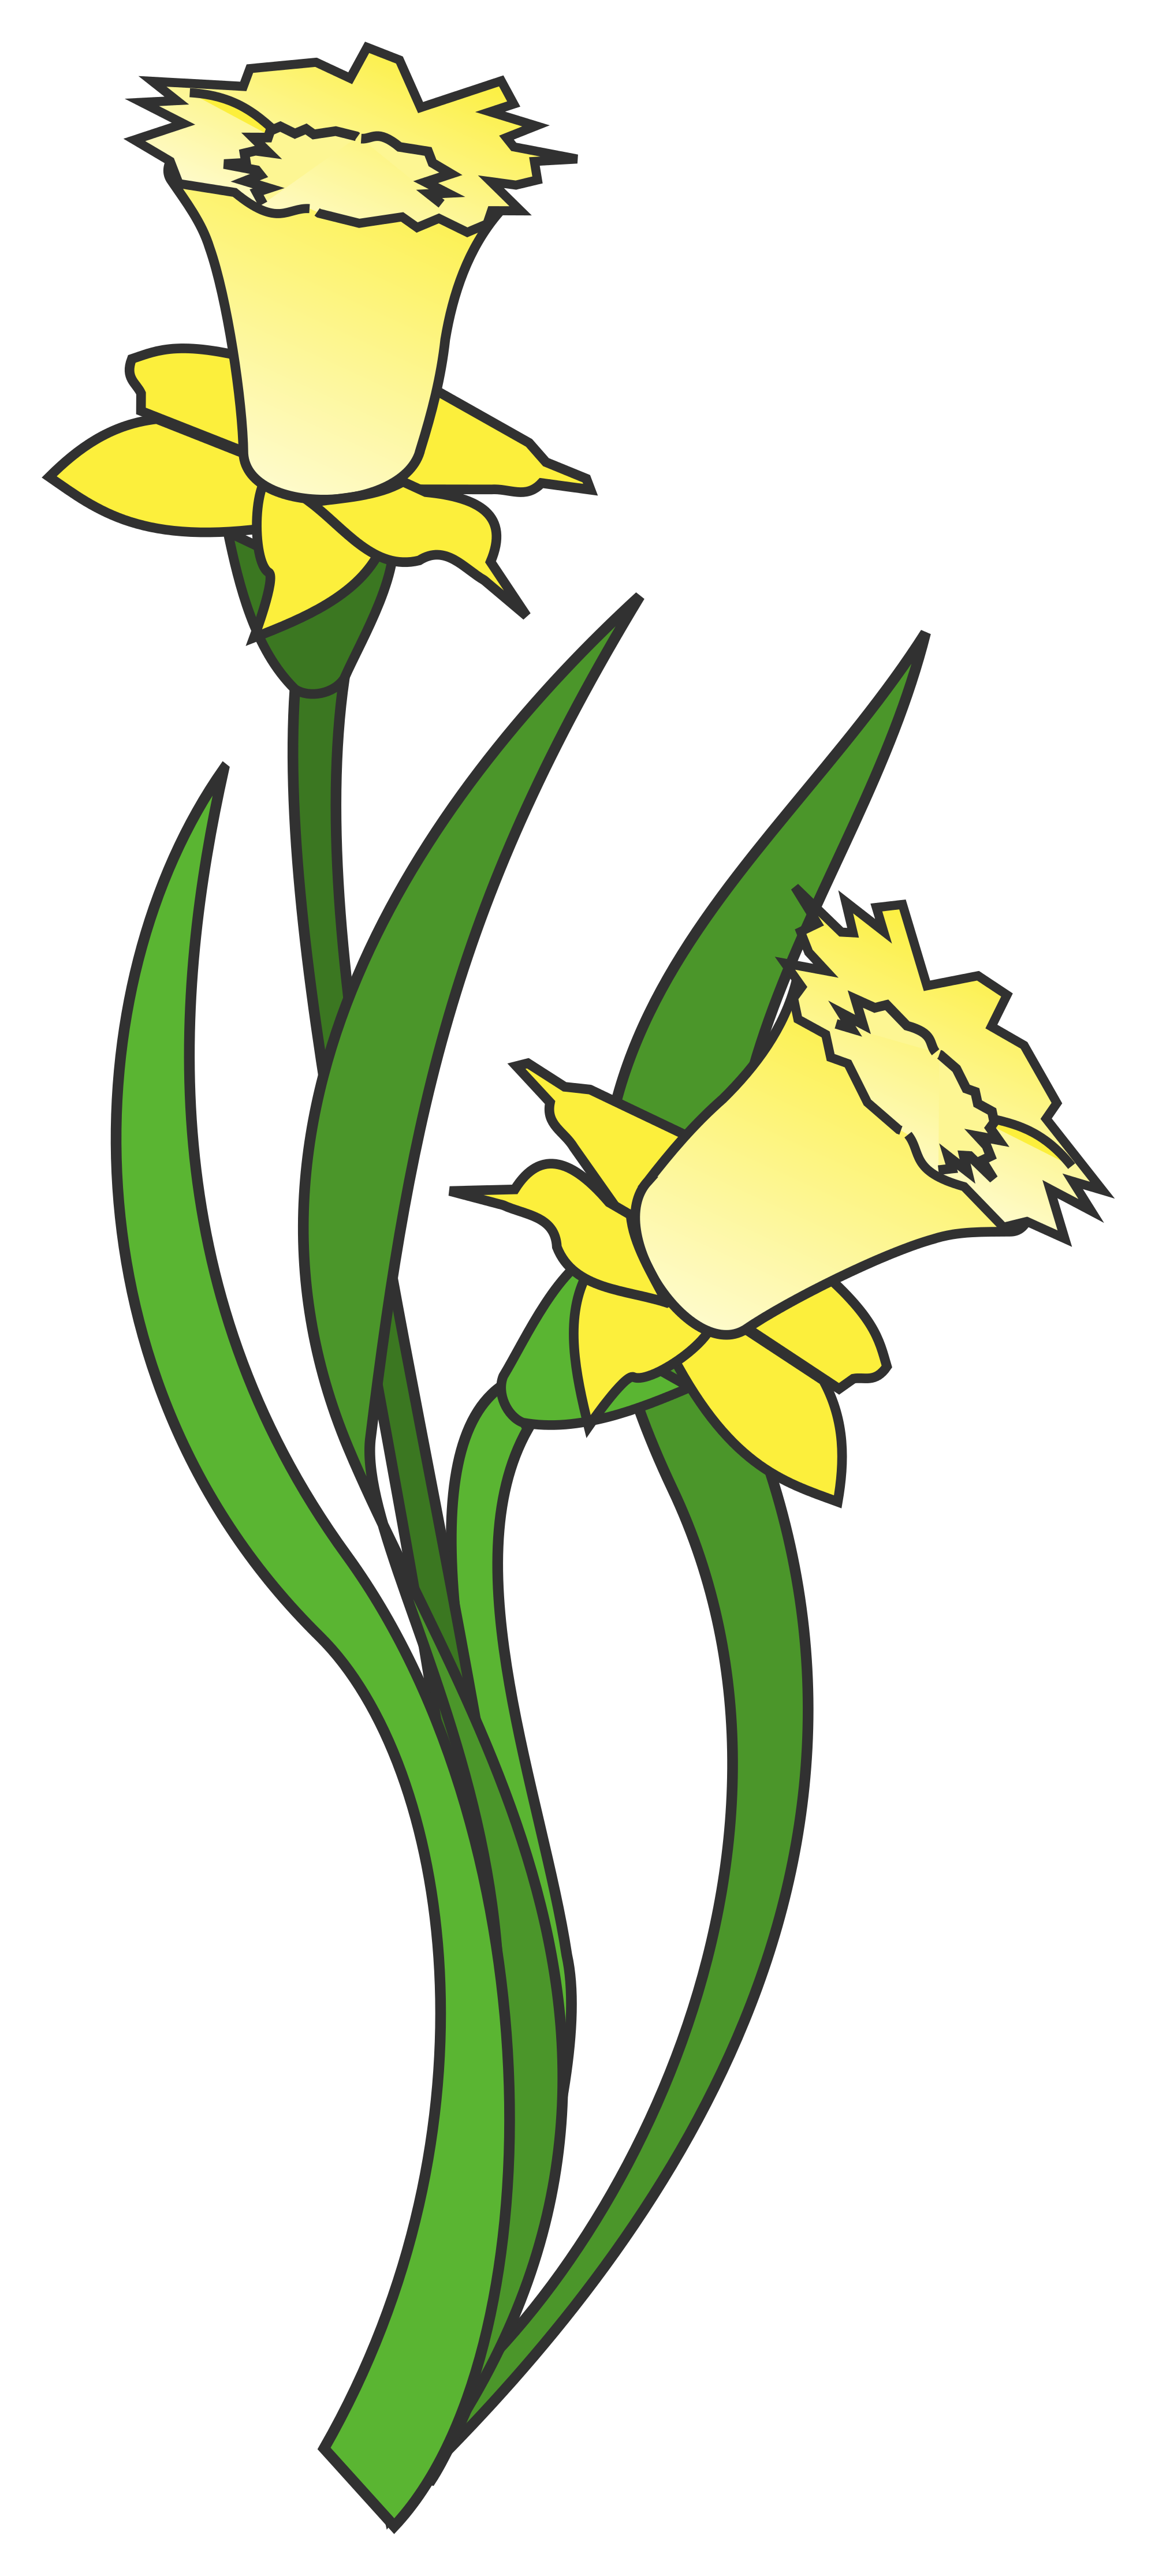 Narcissus svg #18, Download drawings